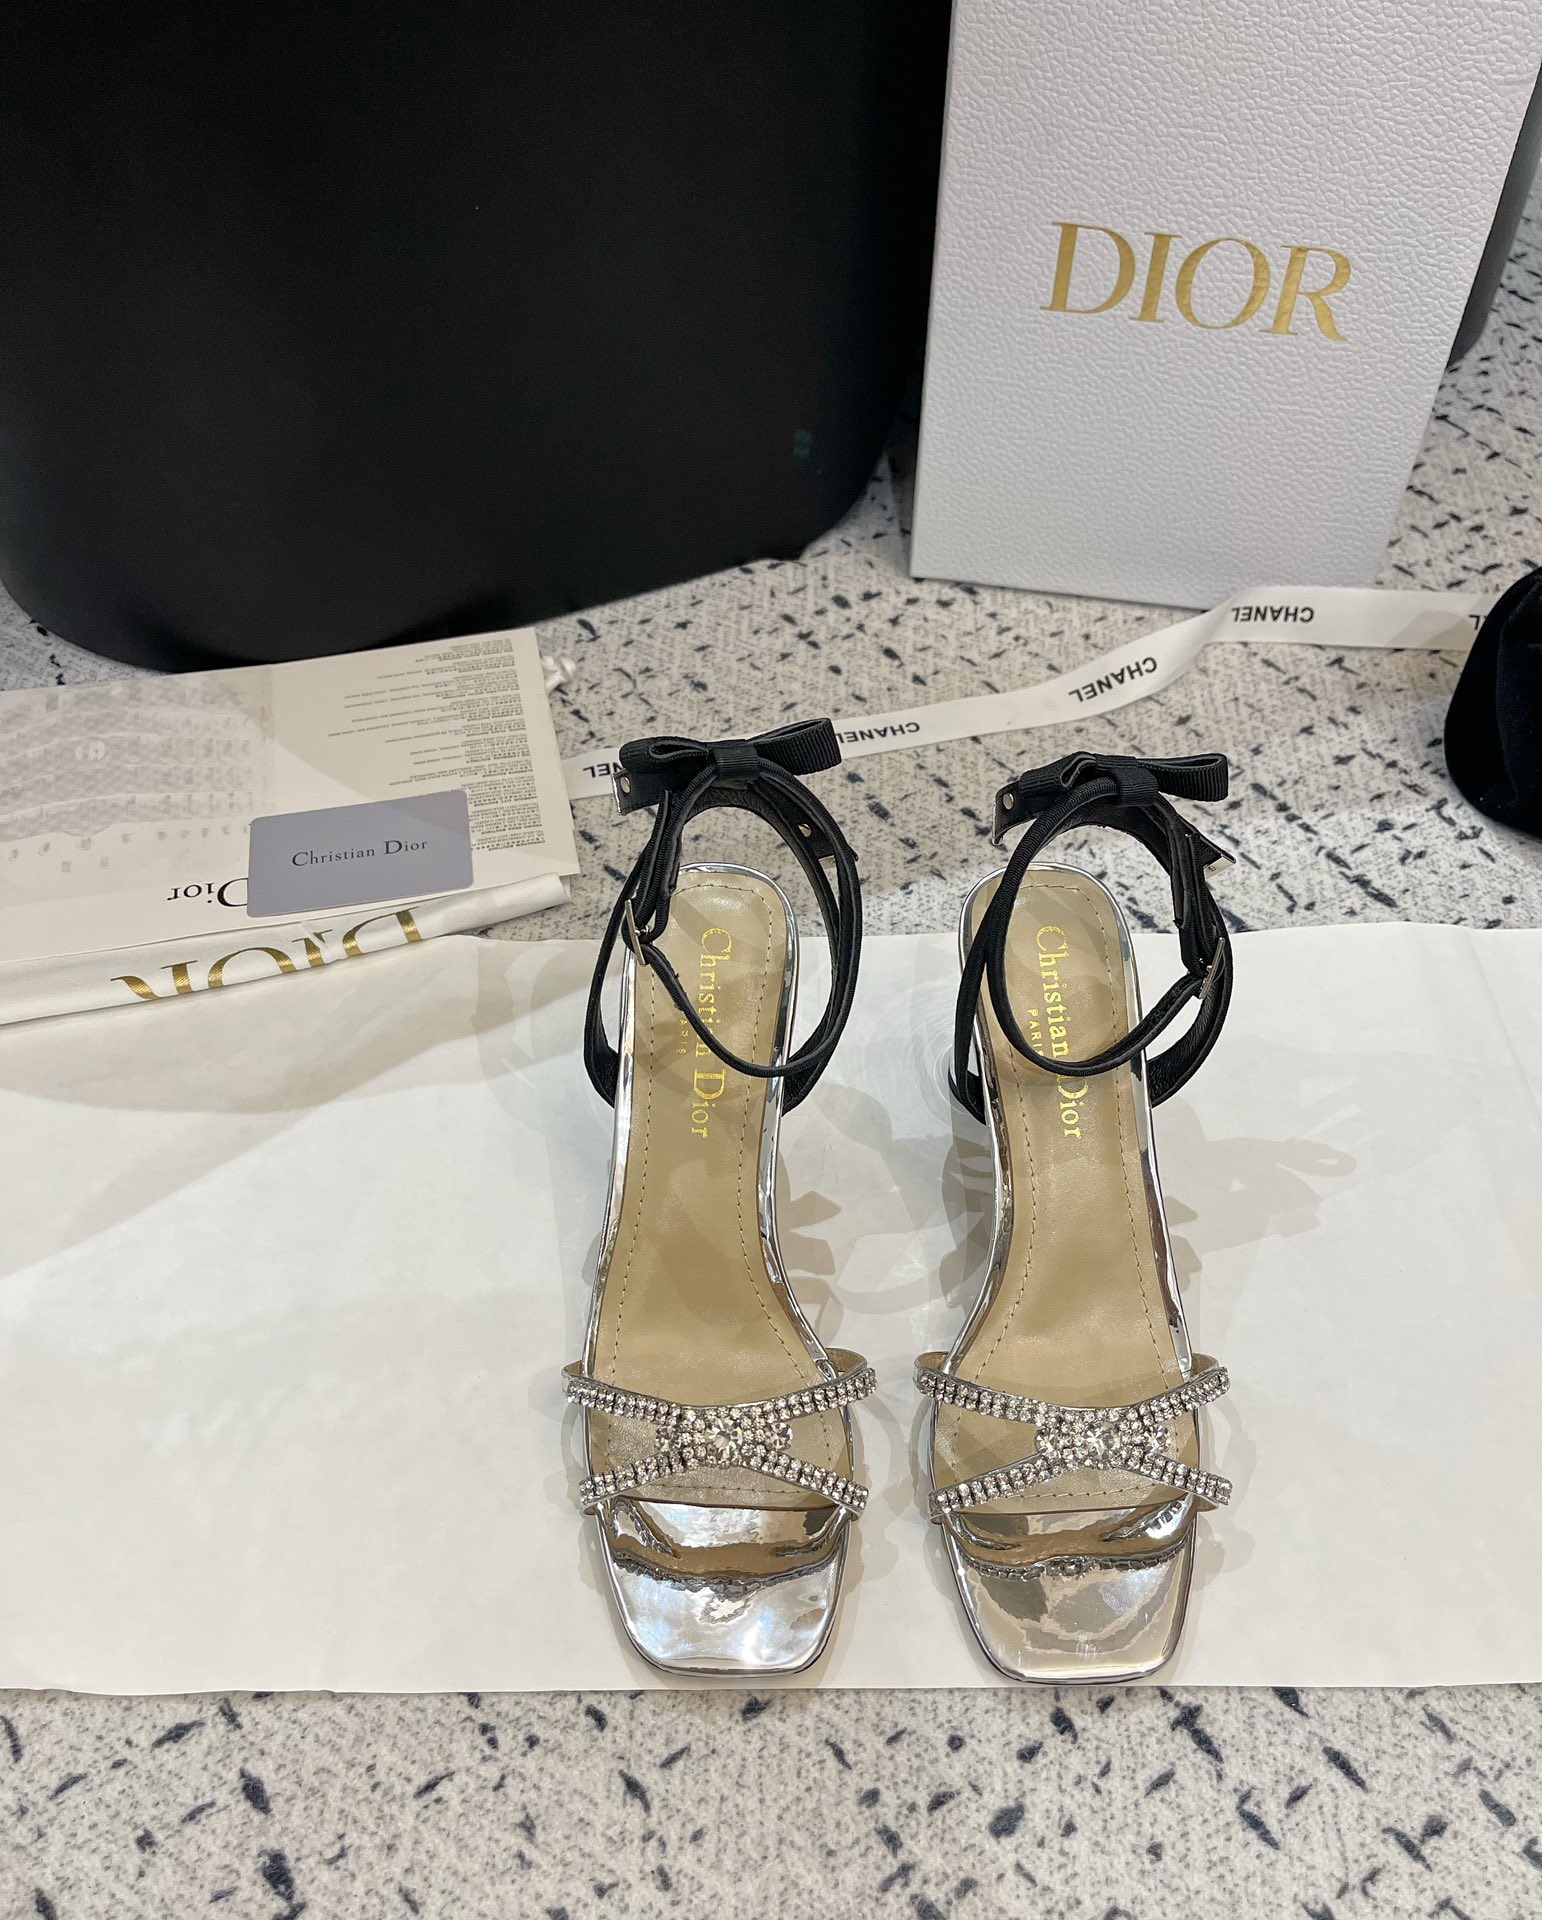 Dior Shoes Sandals Genuine Leather Sheepskin Summer Collection Fashion